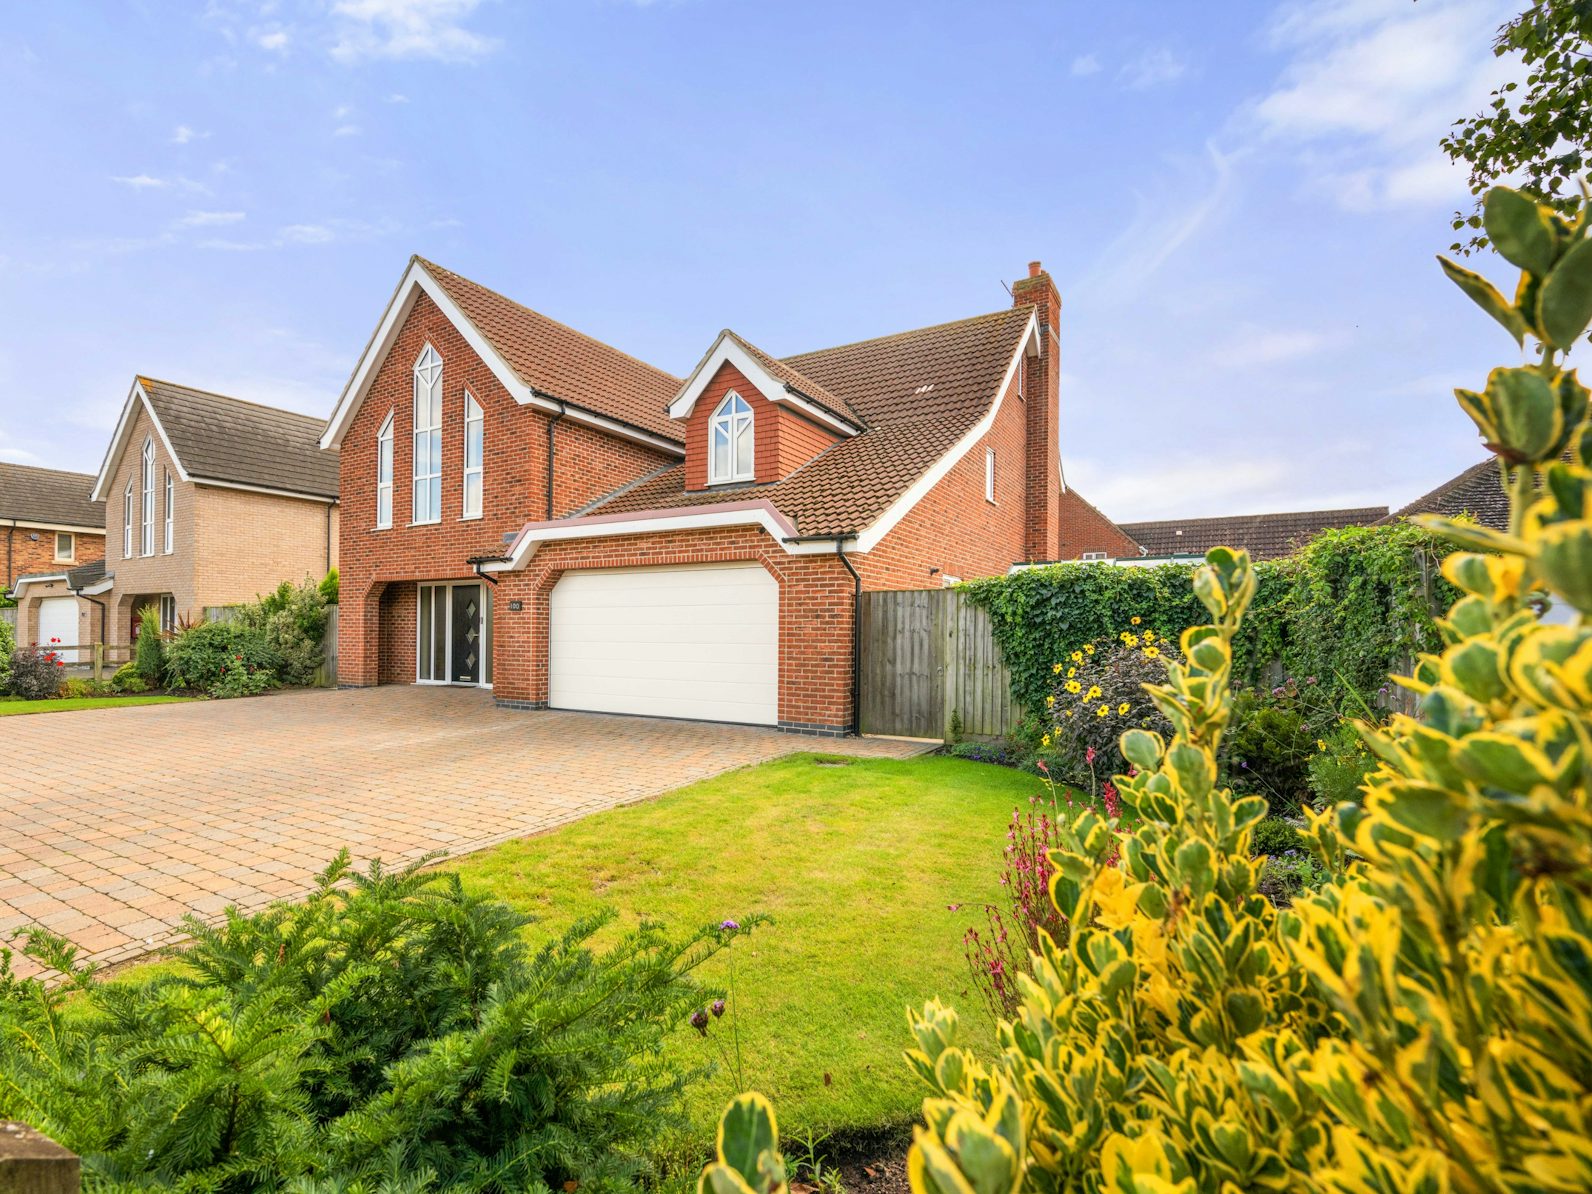 Detached House for sale on Woolram Wygate Spalding, PE11